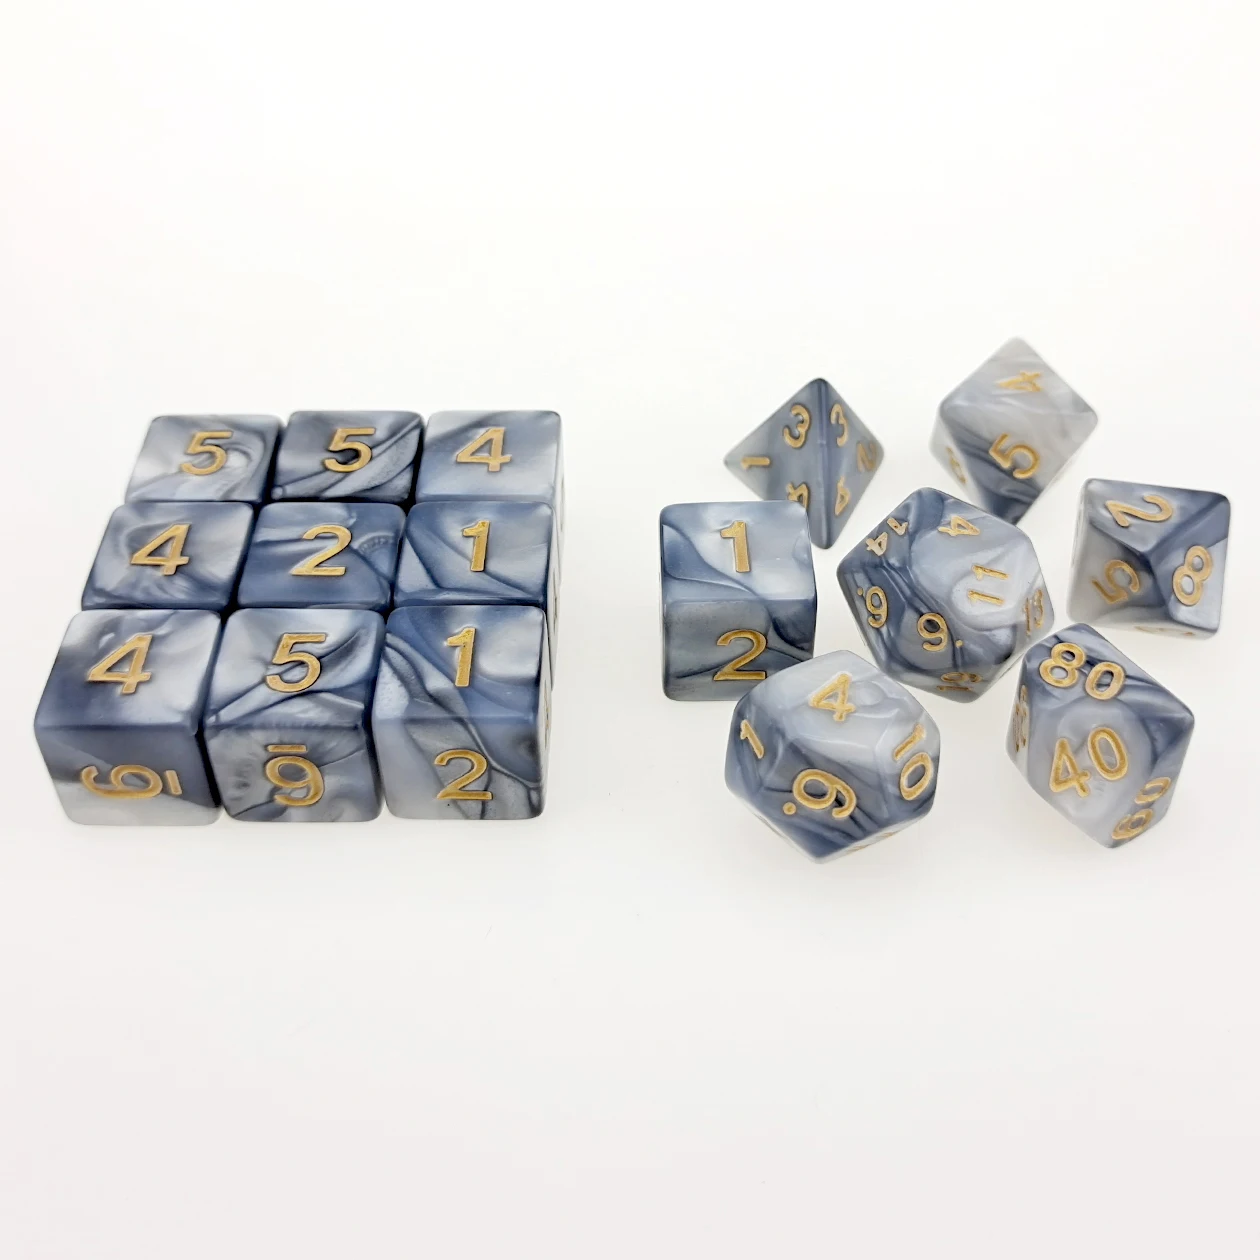 

Rollooo Two-Tone Particular Roleplaying Dice Set Standard 7 + 9 Extra D6s for RPG D&D Games